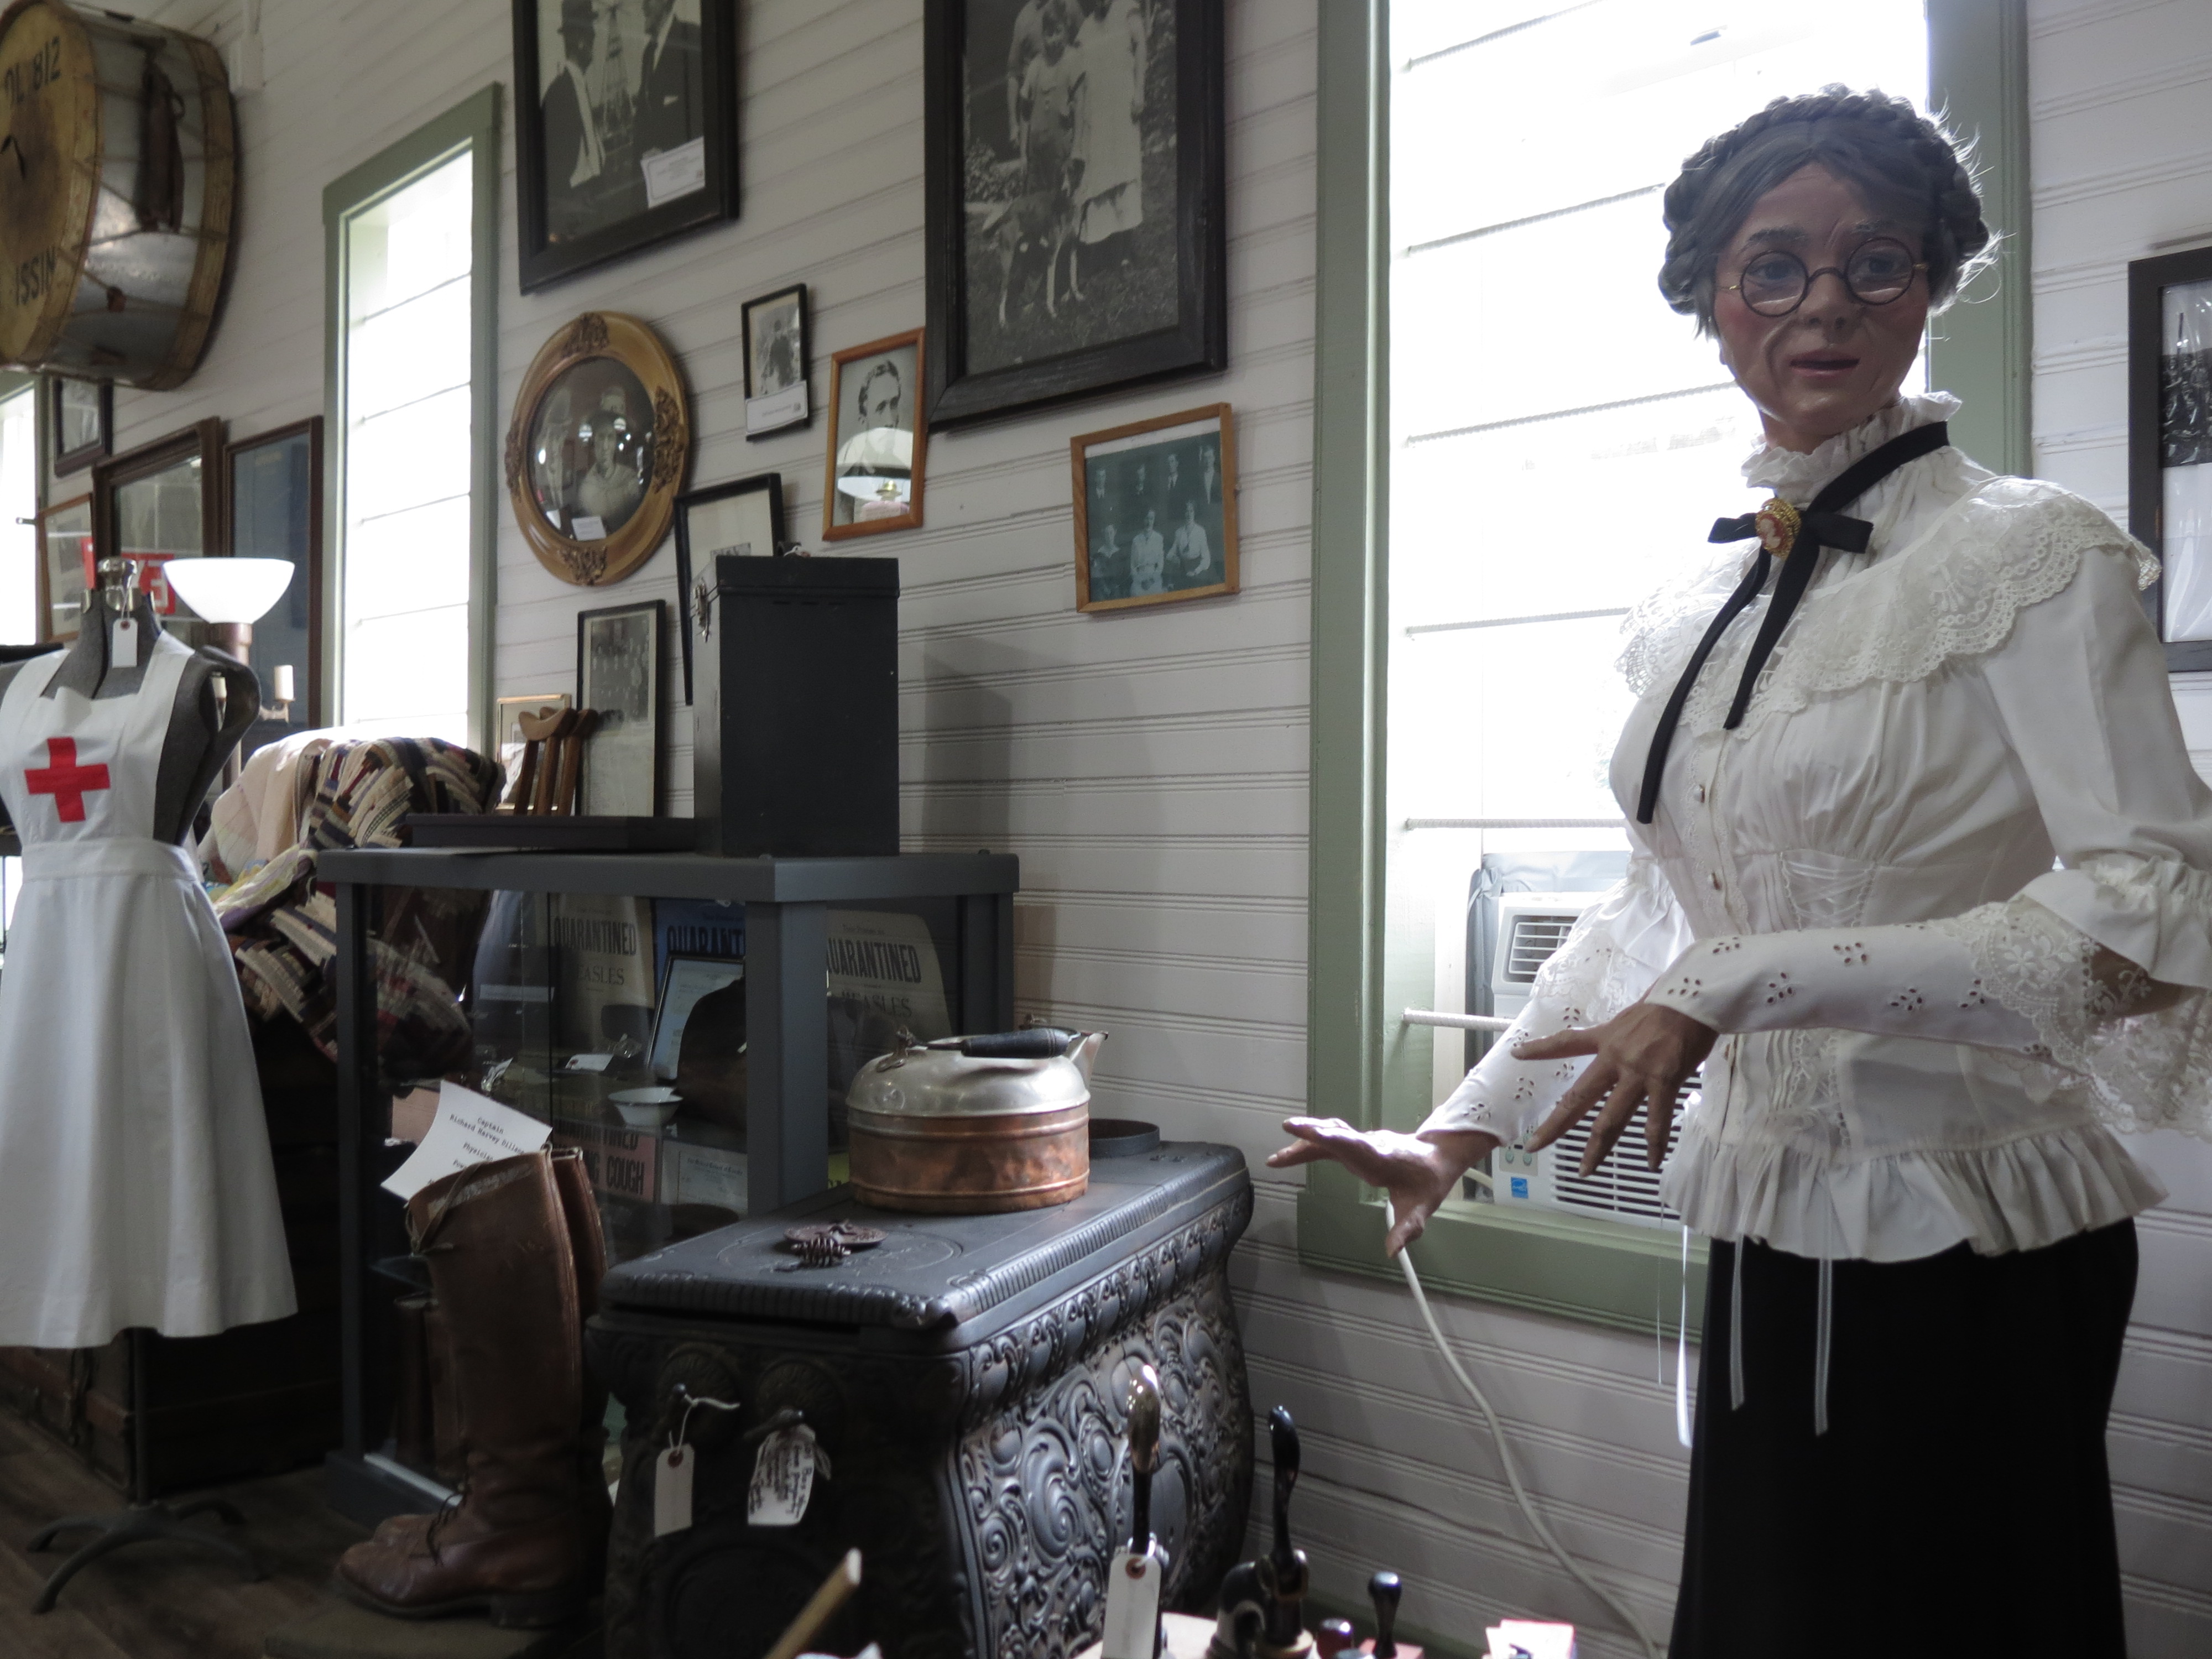 The interior of the Nipissing Township Museum; a series of artifacts on display next to tall sunlit windows, such as hanging pictures, antique clothing on mannequins, and an antique stove.